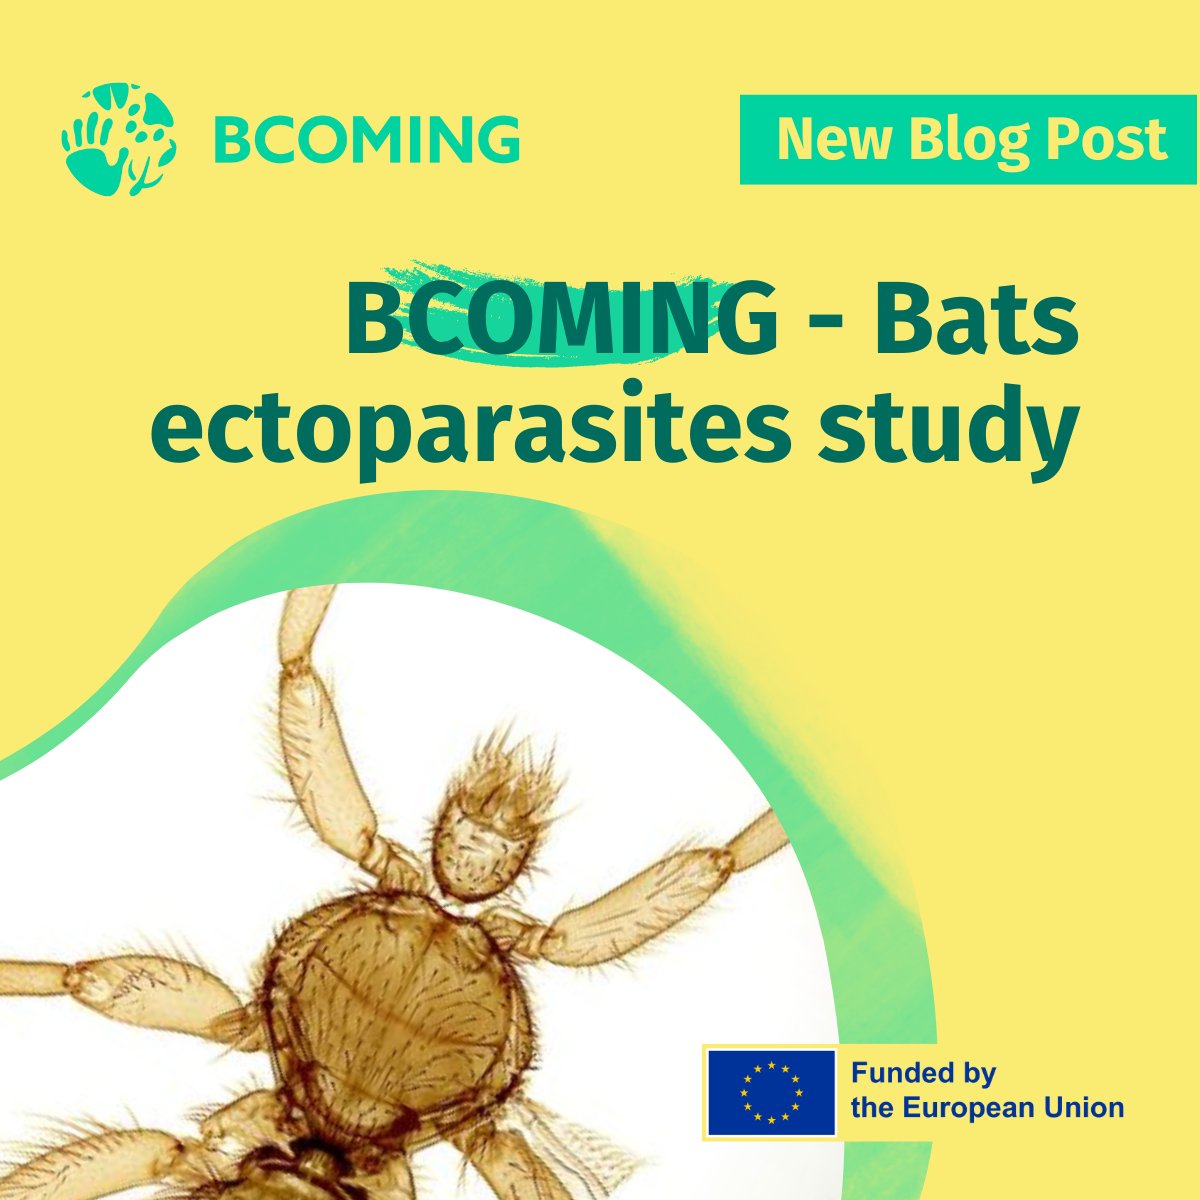 🦇 New Blog Post Alert! 🌿 In our latest blog post you'll get the chance to explore the fascinating world of bat ectoparasites in #Cambodia as part of the #BCOMING project's research efforts. 📖 Check out the full post on our website! bit.ly/3QGGEQG